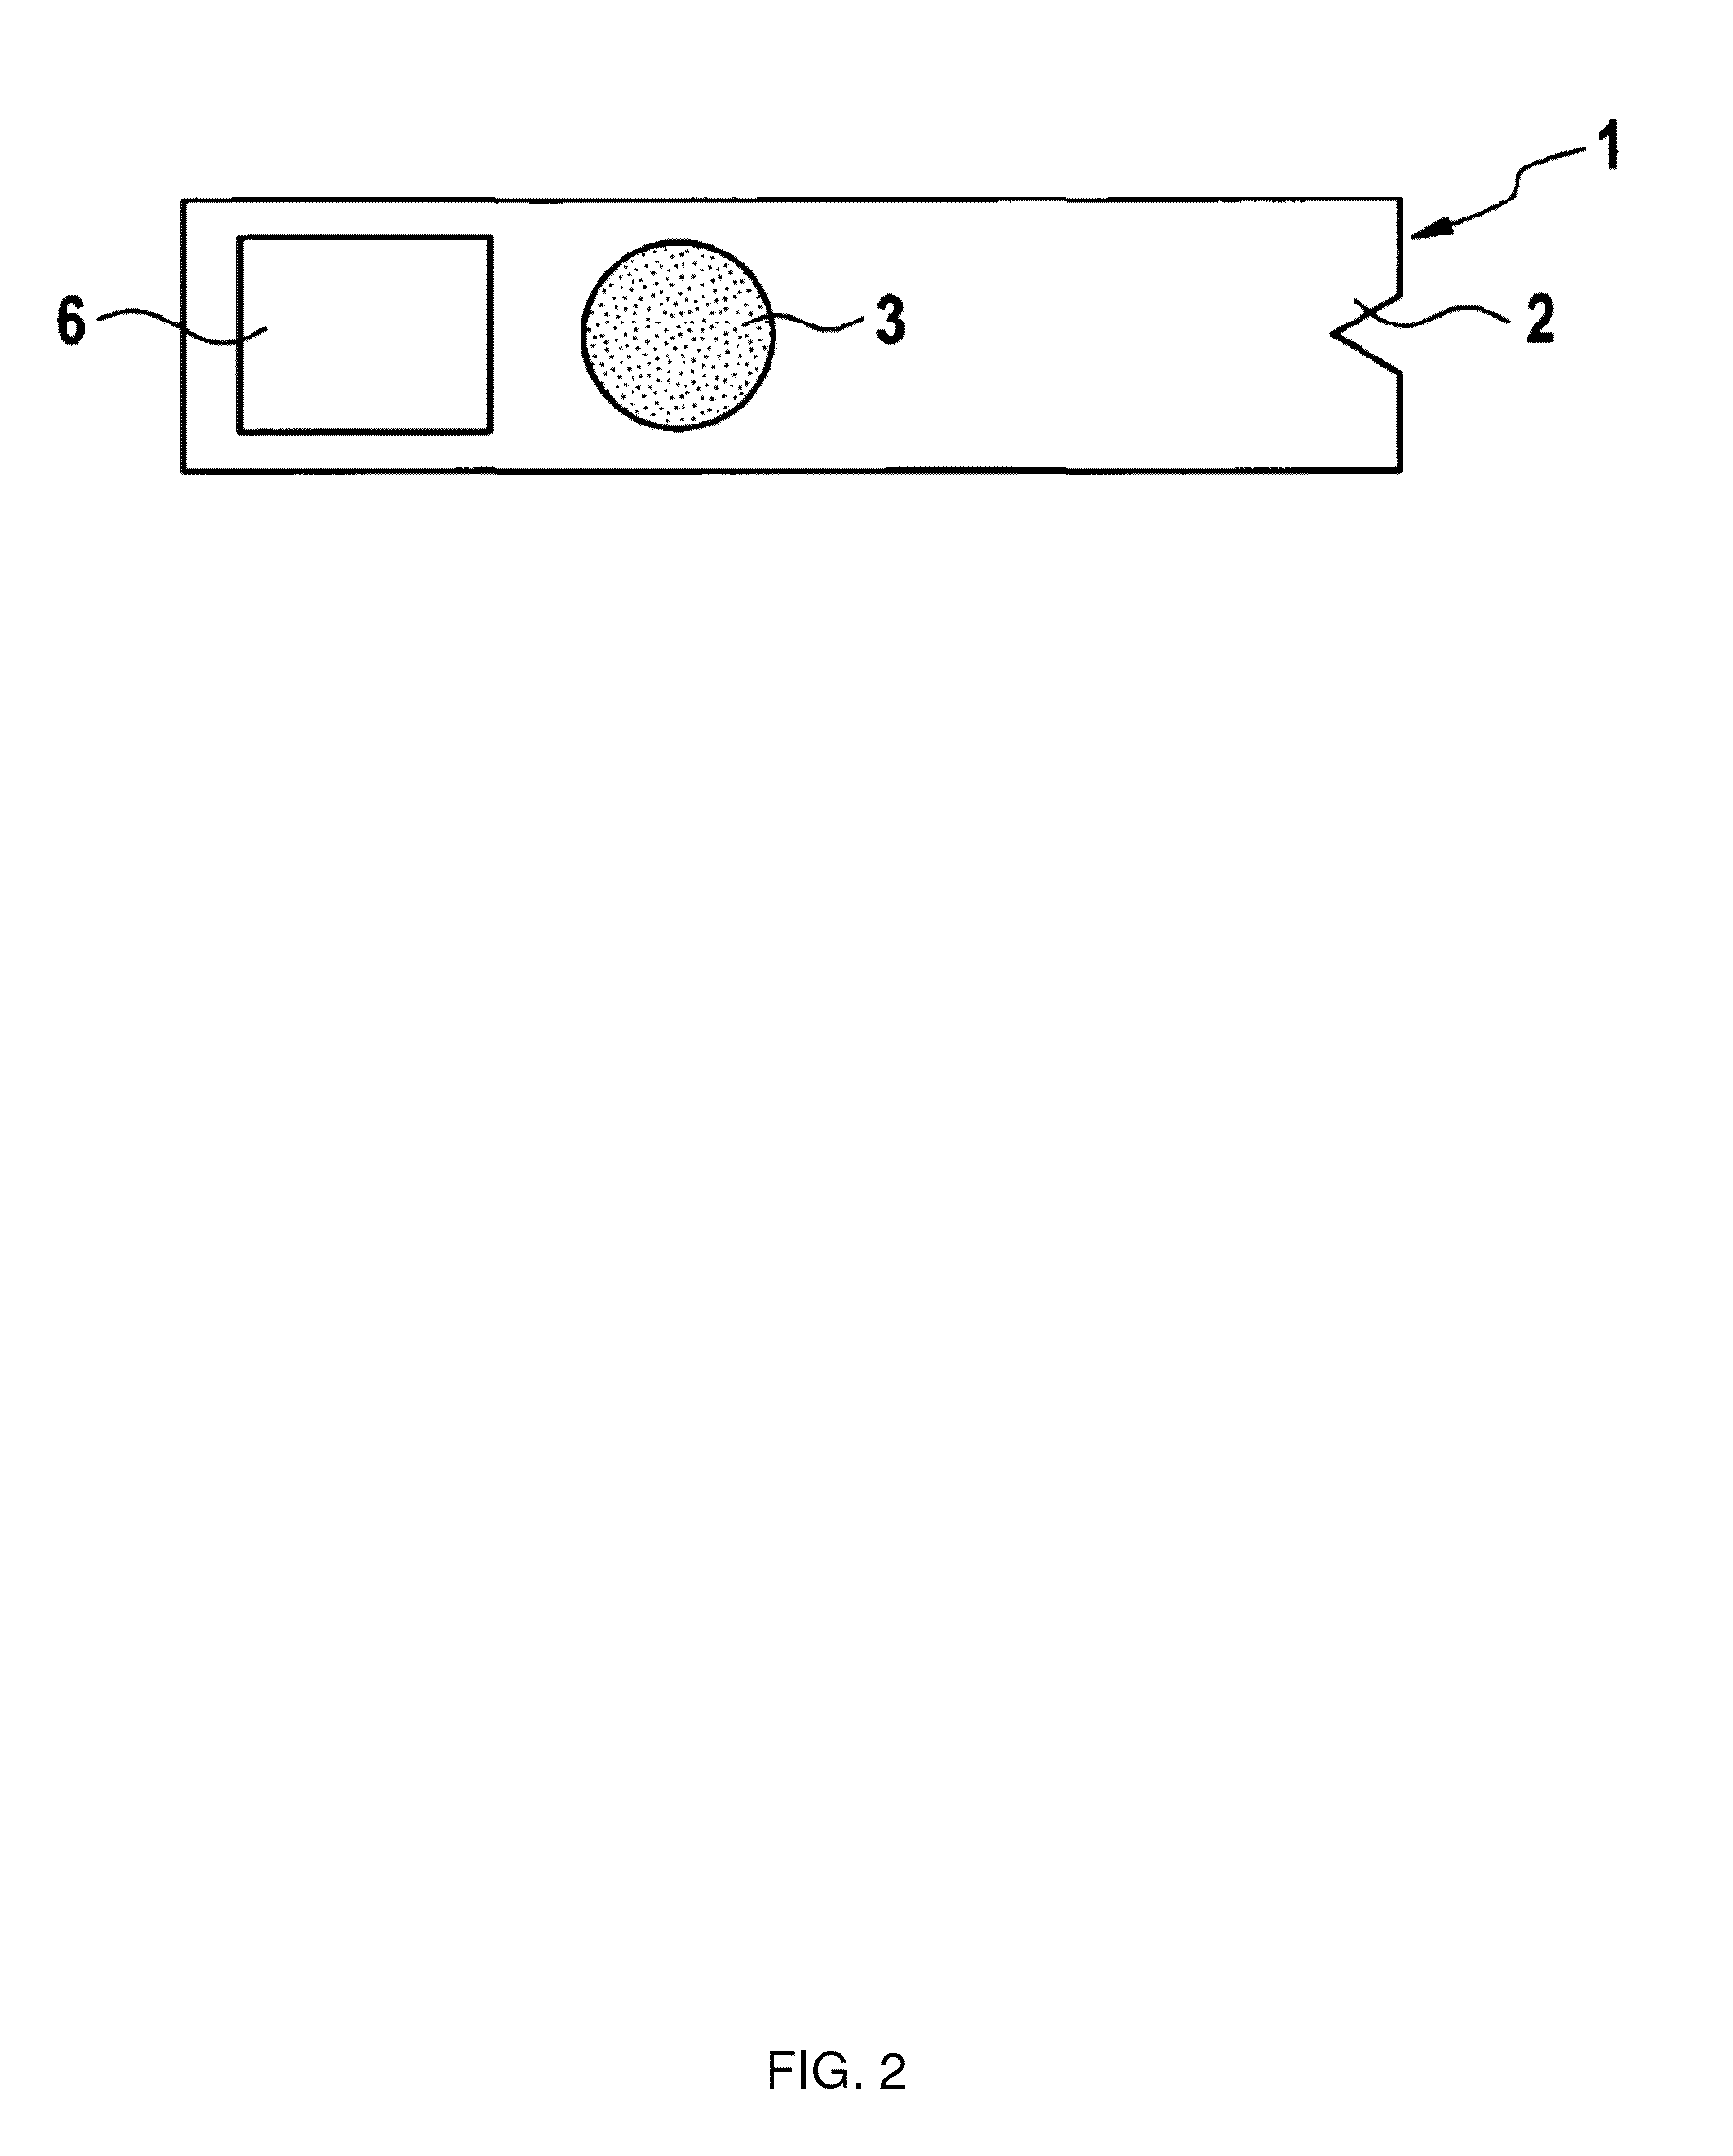 Test element having an optical data storage, device for reading the optical data storage of the test element and measuring system thereof